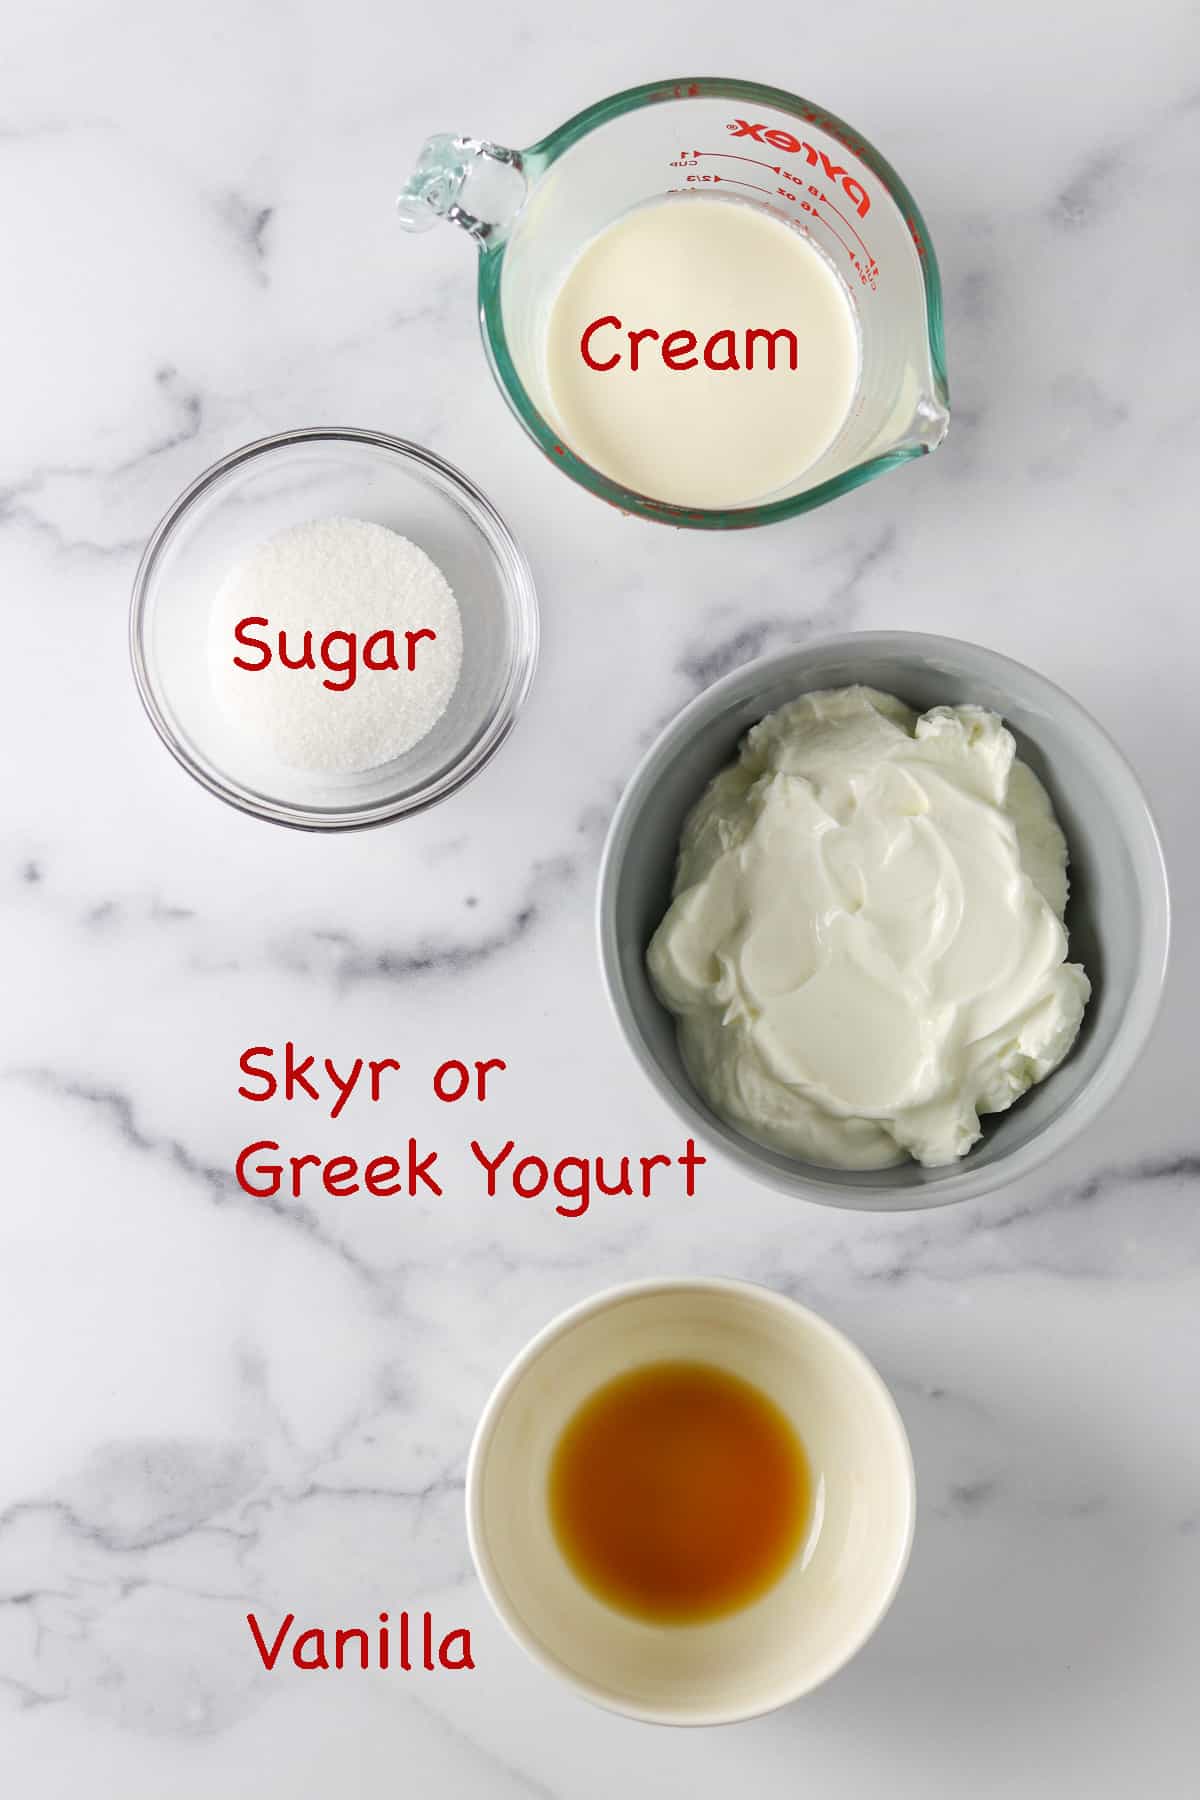 Labeled ingredients for Whipped Vanilla Cream Skyr.